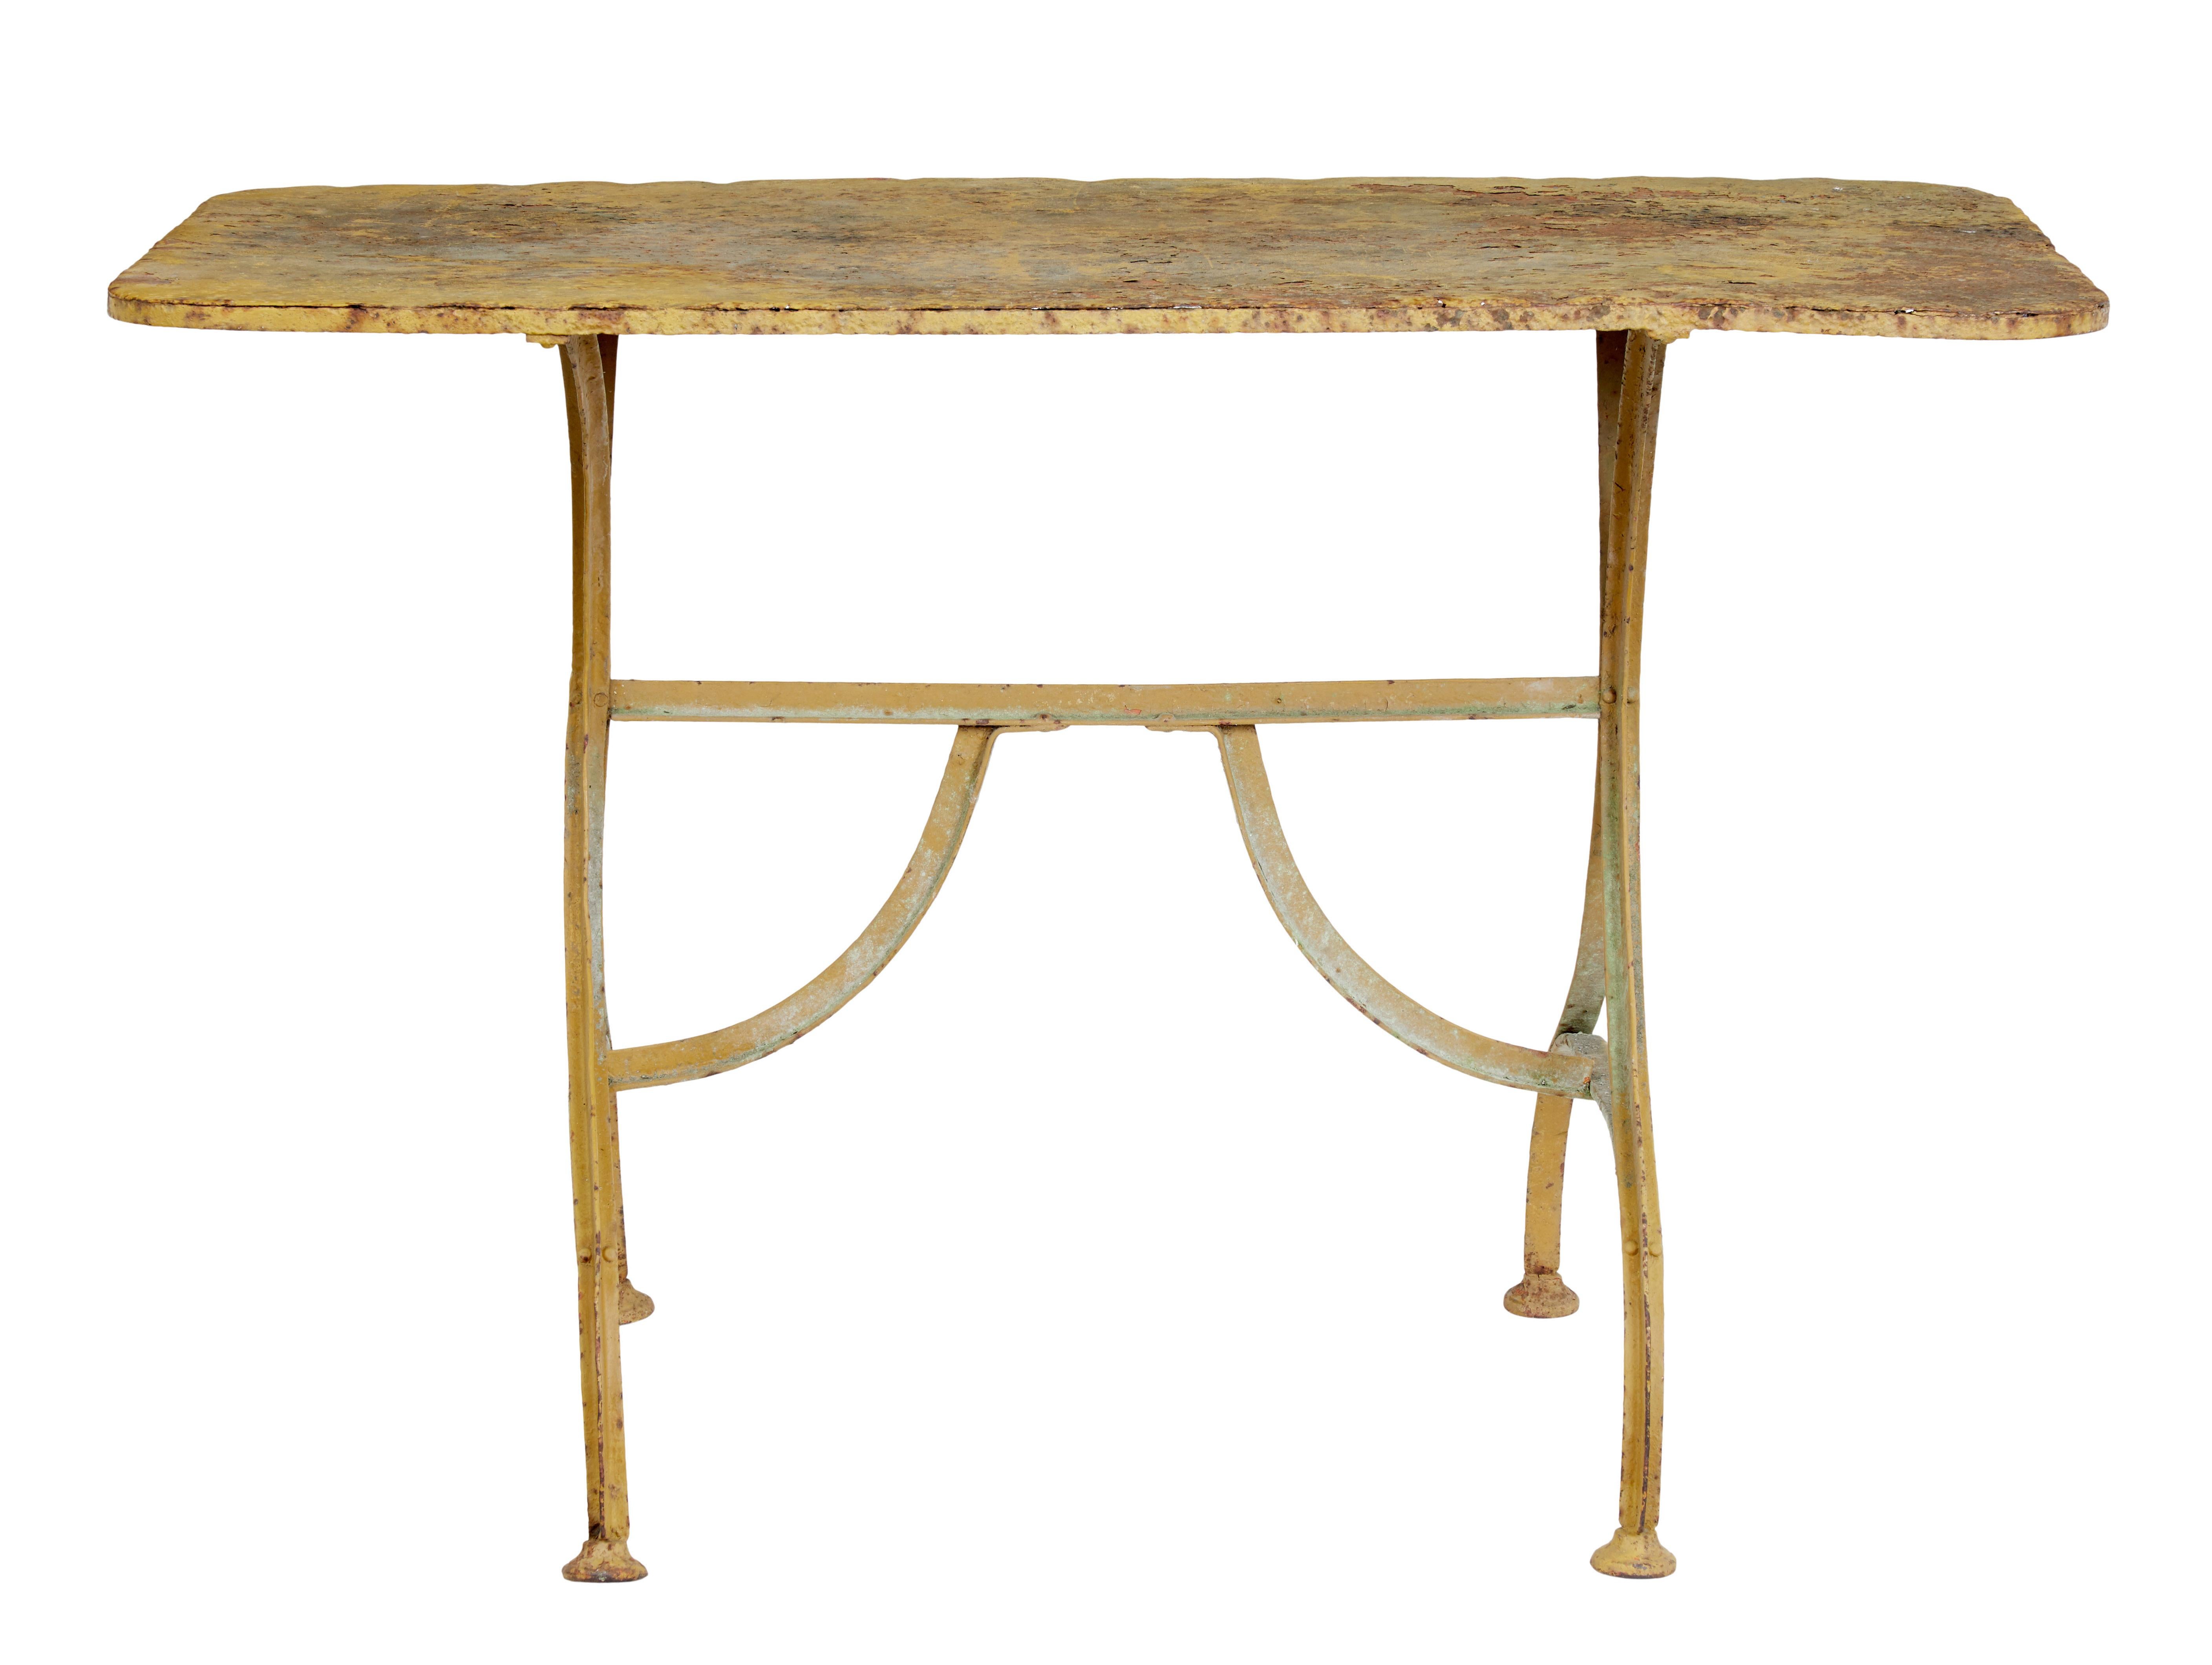 Late 19th century painted cast iron garden table, circa 1890.

Good quality table presented in its original condition. Rectangular top with rounded edges, standing on a arch shaped trestle base, united by stretcher.

Original paint with obvious